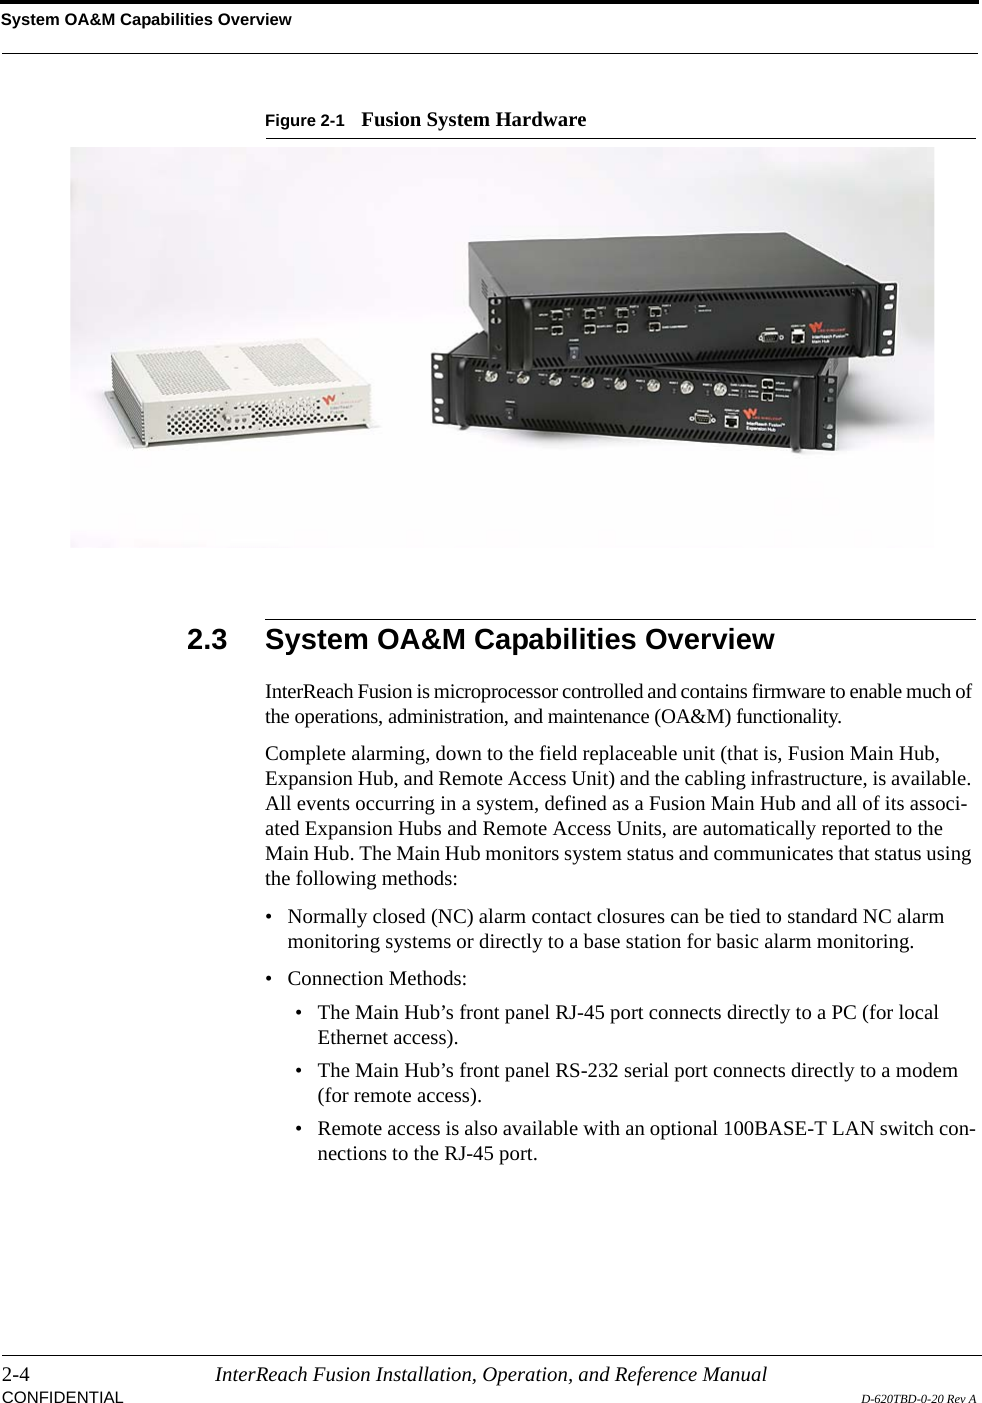 System OA&amp;M Capabilities Overview2-4 InterReach Fusion Installation, Operation, and Reference ManualCONFIDENTIAL D-620TBD-0-20 Rev AFigure 2-1 Fusion System Hardware2.3 System OA&amp;M Capabilities OverviewInterReach Fusion is microprocessor controlled and contains firmware to enable much of the operations, administration, and maintenance (OA&amp;M) functionality.Complete alarming, down to the field replaceable unit (that is, Fusion Main Hub, Expansion Hub, and Remote Access Unit) and the cabling infrastructure, is available. All events occurring in a system, defined as a Fusion Main Hub and all of its associ-ated Expansion Hubs and Remote Access Units, are automatically reported to the Main Hub. The Main Hub monitors system status and communicates that status using the following methods:• Normally closed (NC) alarm contact closures can be tied to standard NC alarm monitoring systems or directly to a base station for basic alarm monitoring.• Connection Methods:• The Main Hub’s front panel RJ-45 port connects directly to a PC (for local Ethernet access). • The Main Hub’s front panel RS-232 serial port connects directly to a modem (for remote access). • Remote access is also available with an optional 100BASE-T LAN switch con-nections to the RJ-45 port.